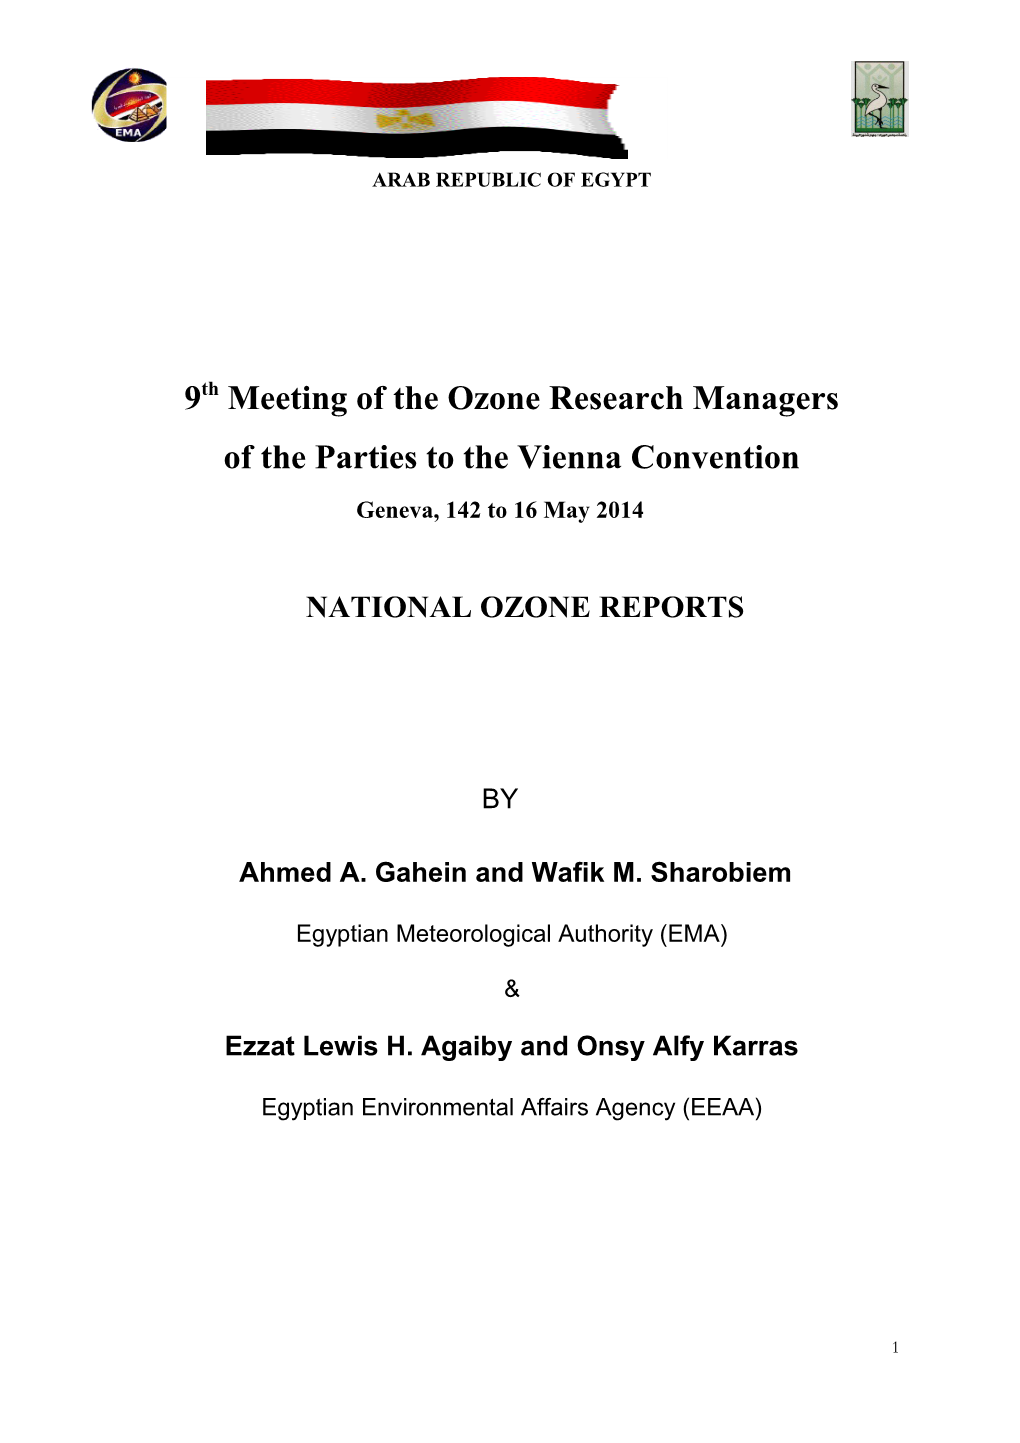 9Thmeeting of the Ozone Research Managers